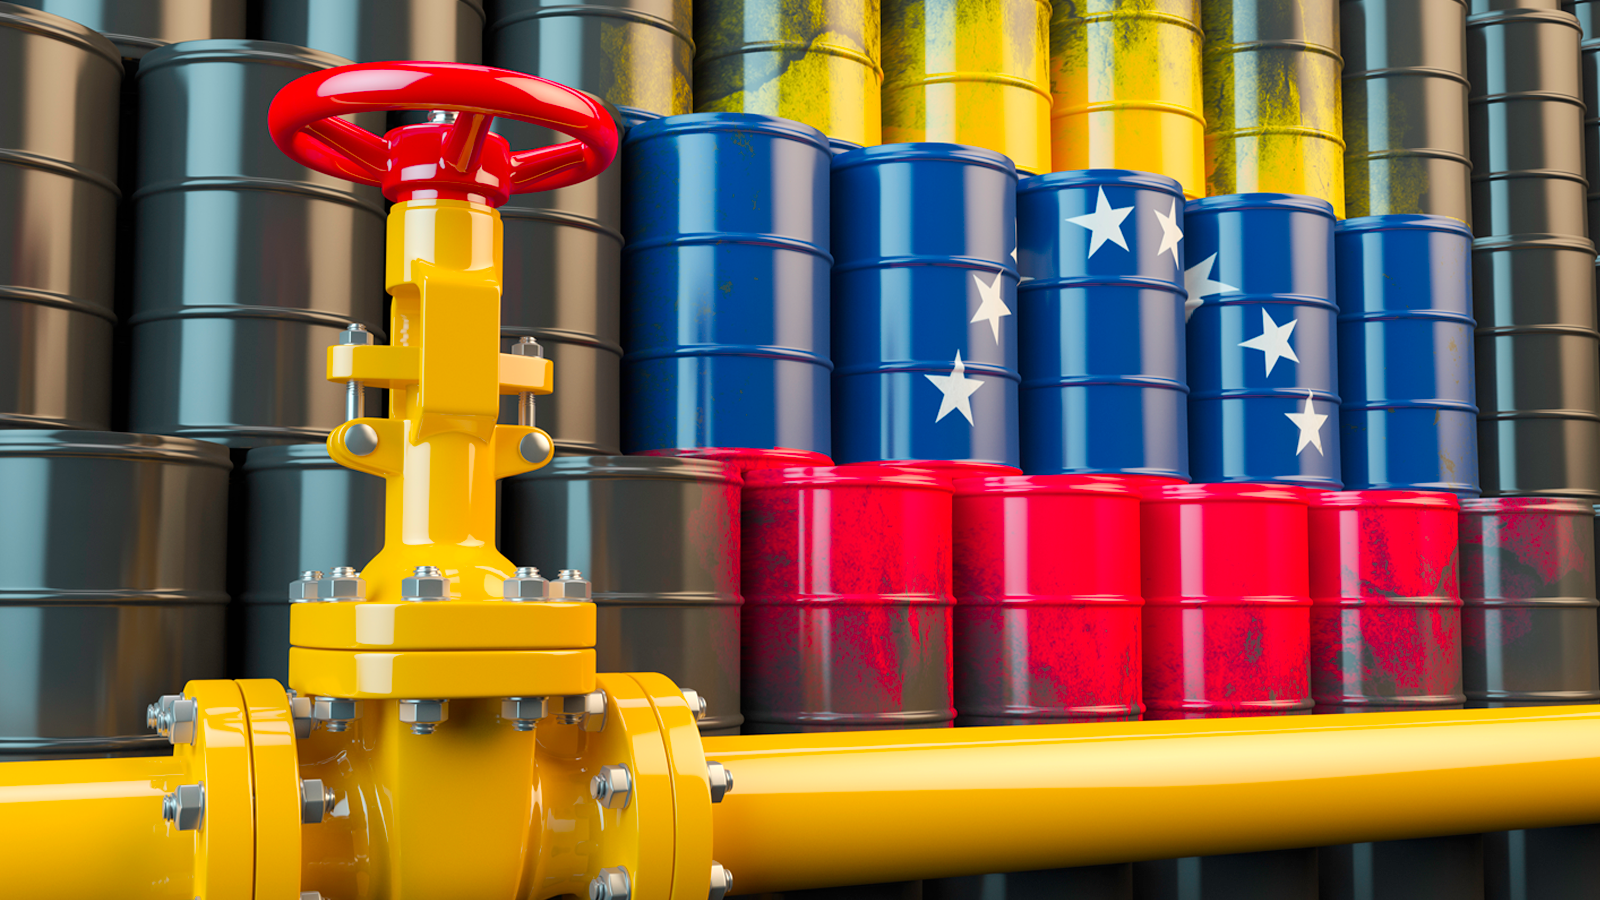 Photograph of oil drums and valve with Venezuelan flag painted on it